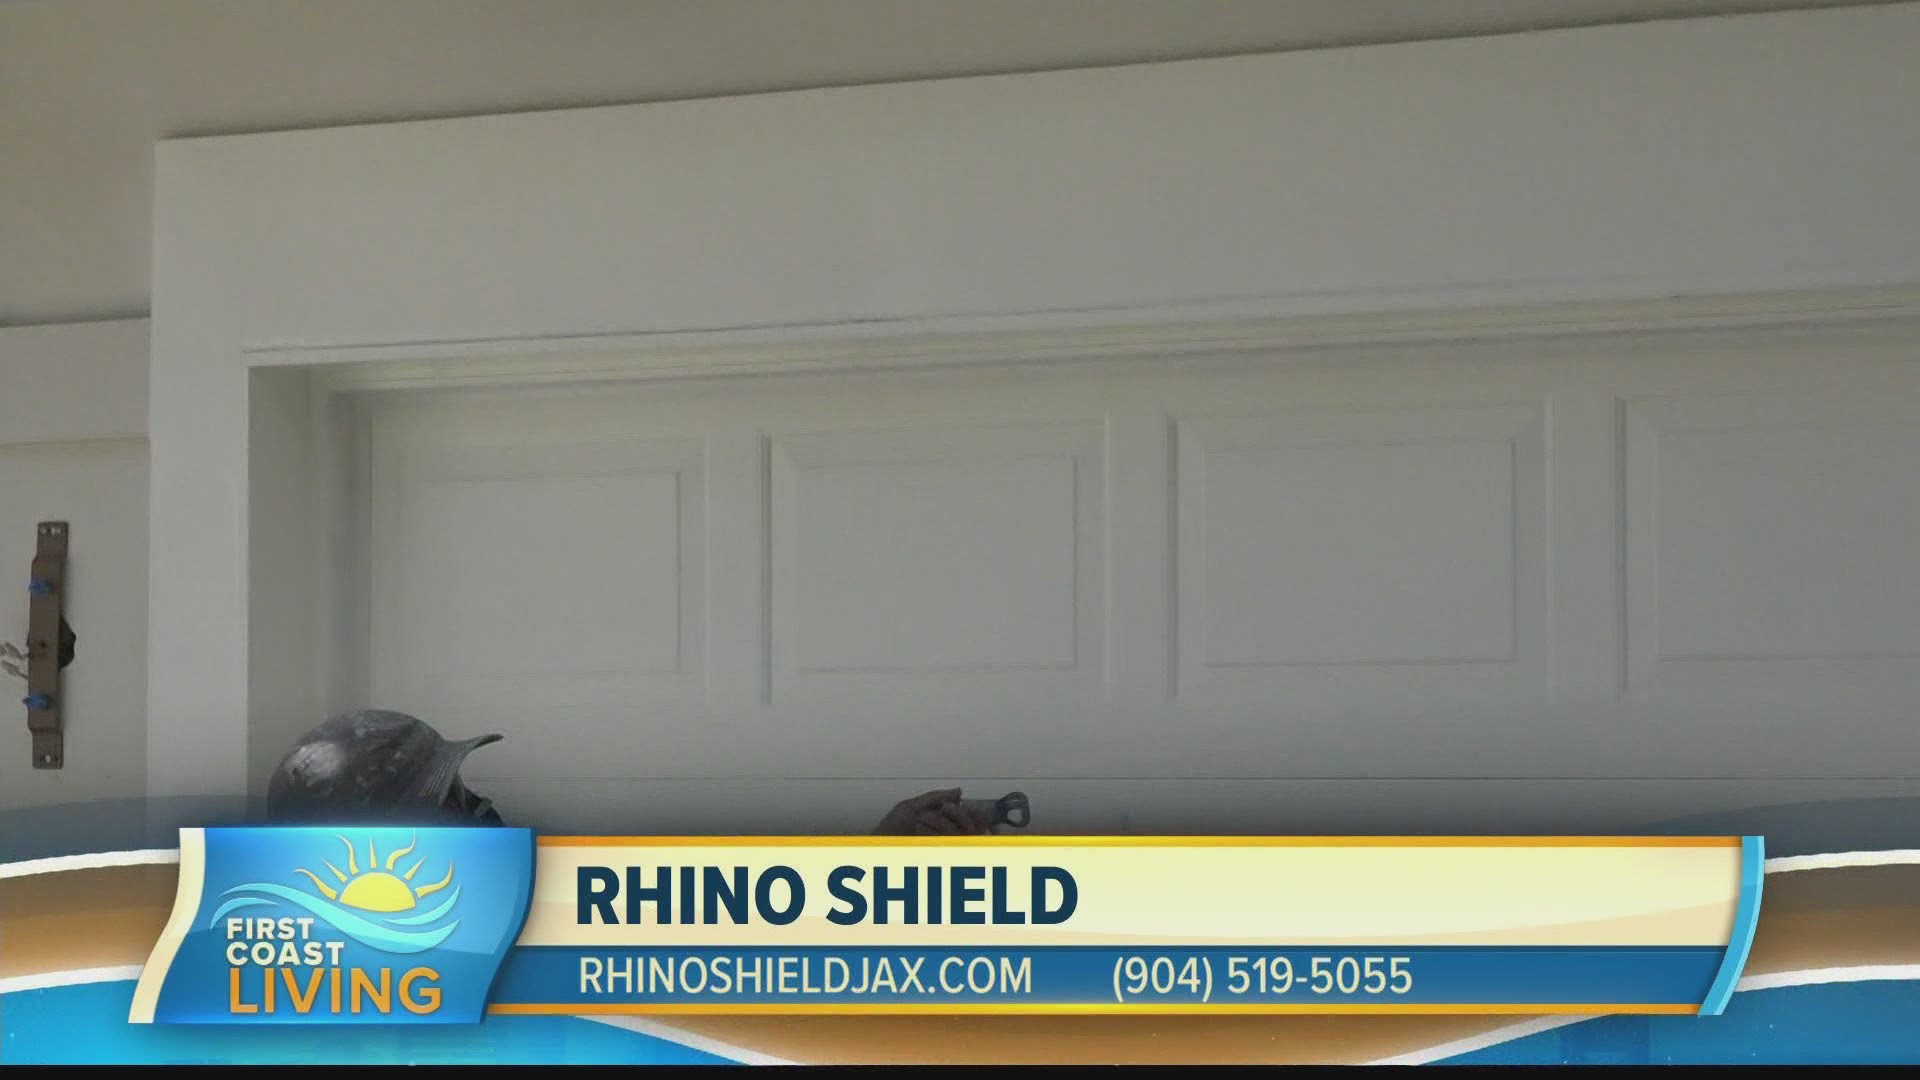 Are you looking to take the outside of your home to the next level? Rhino Shield can help.